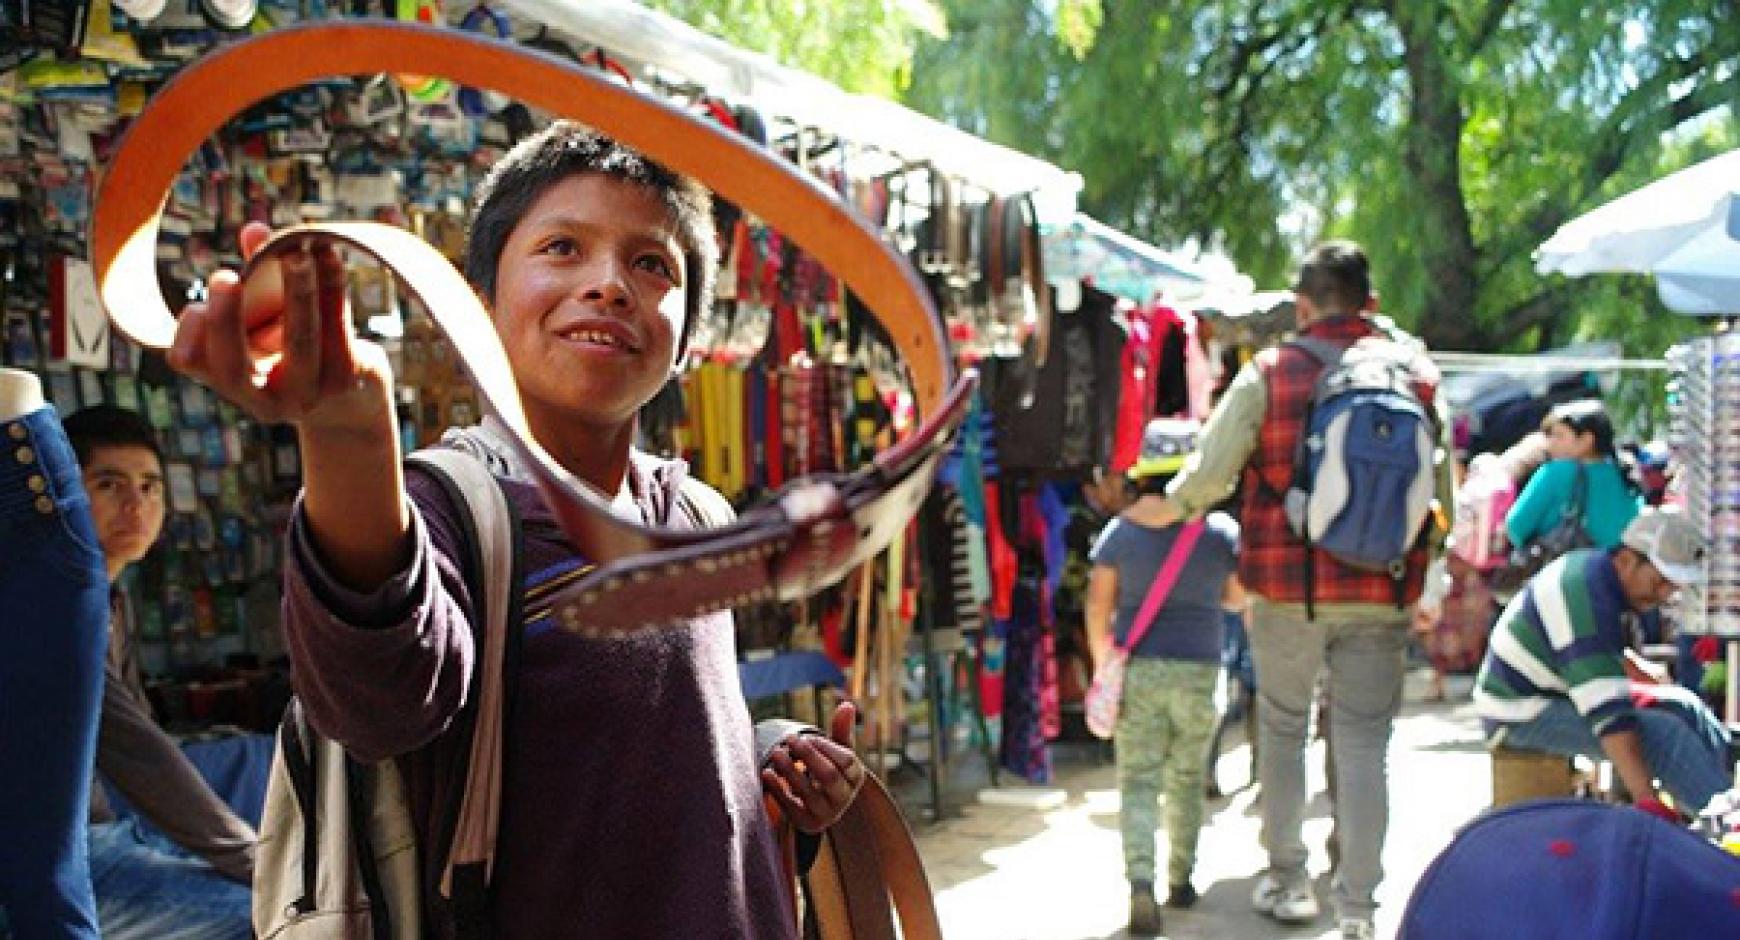 Winning photograph entitled "Cinturoncito" by Scott Squires. Image is of a smiling, young Latin-American boy standing in an outdoor market holding up a small leather belt.